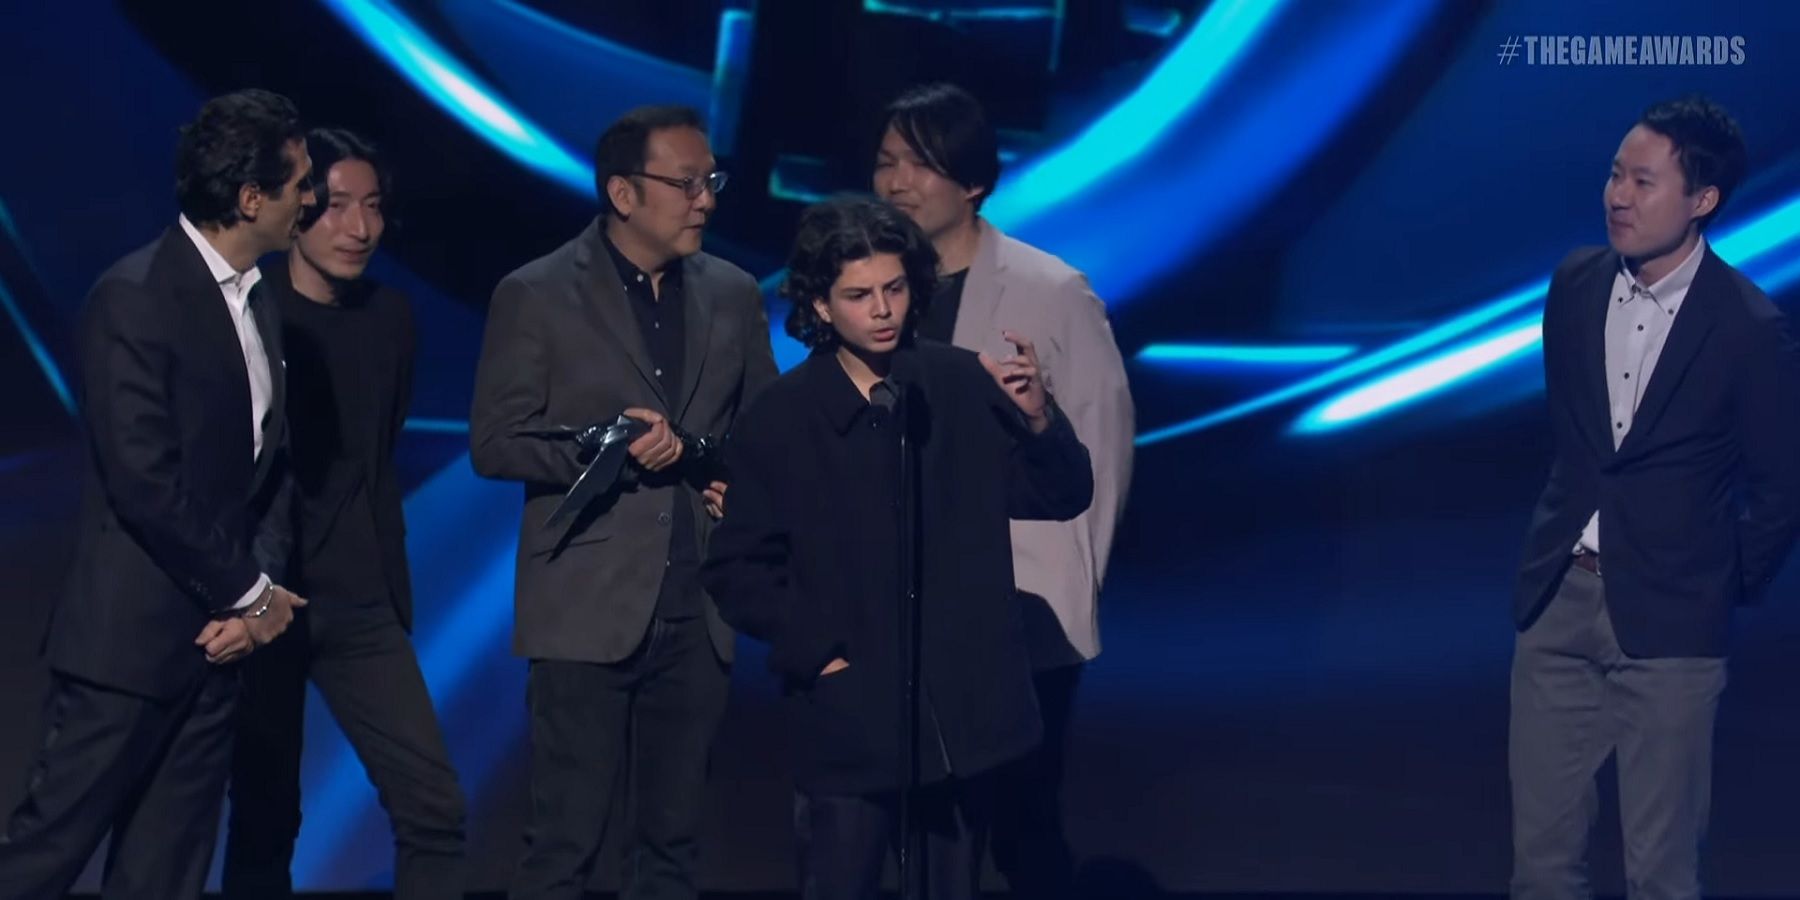 The Game Awards Attempts to Photoshop Bill Clinton Kid Out of